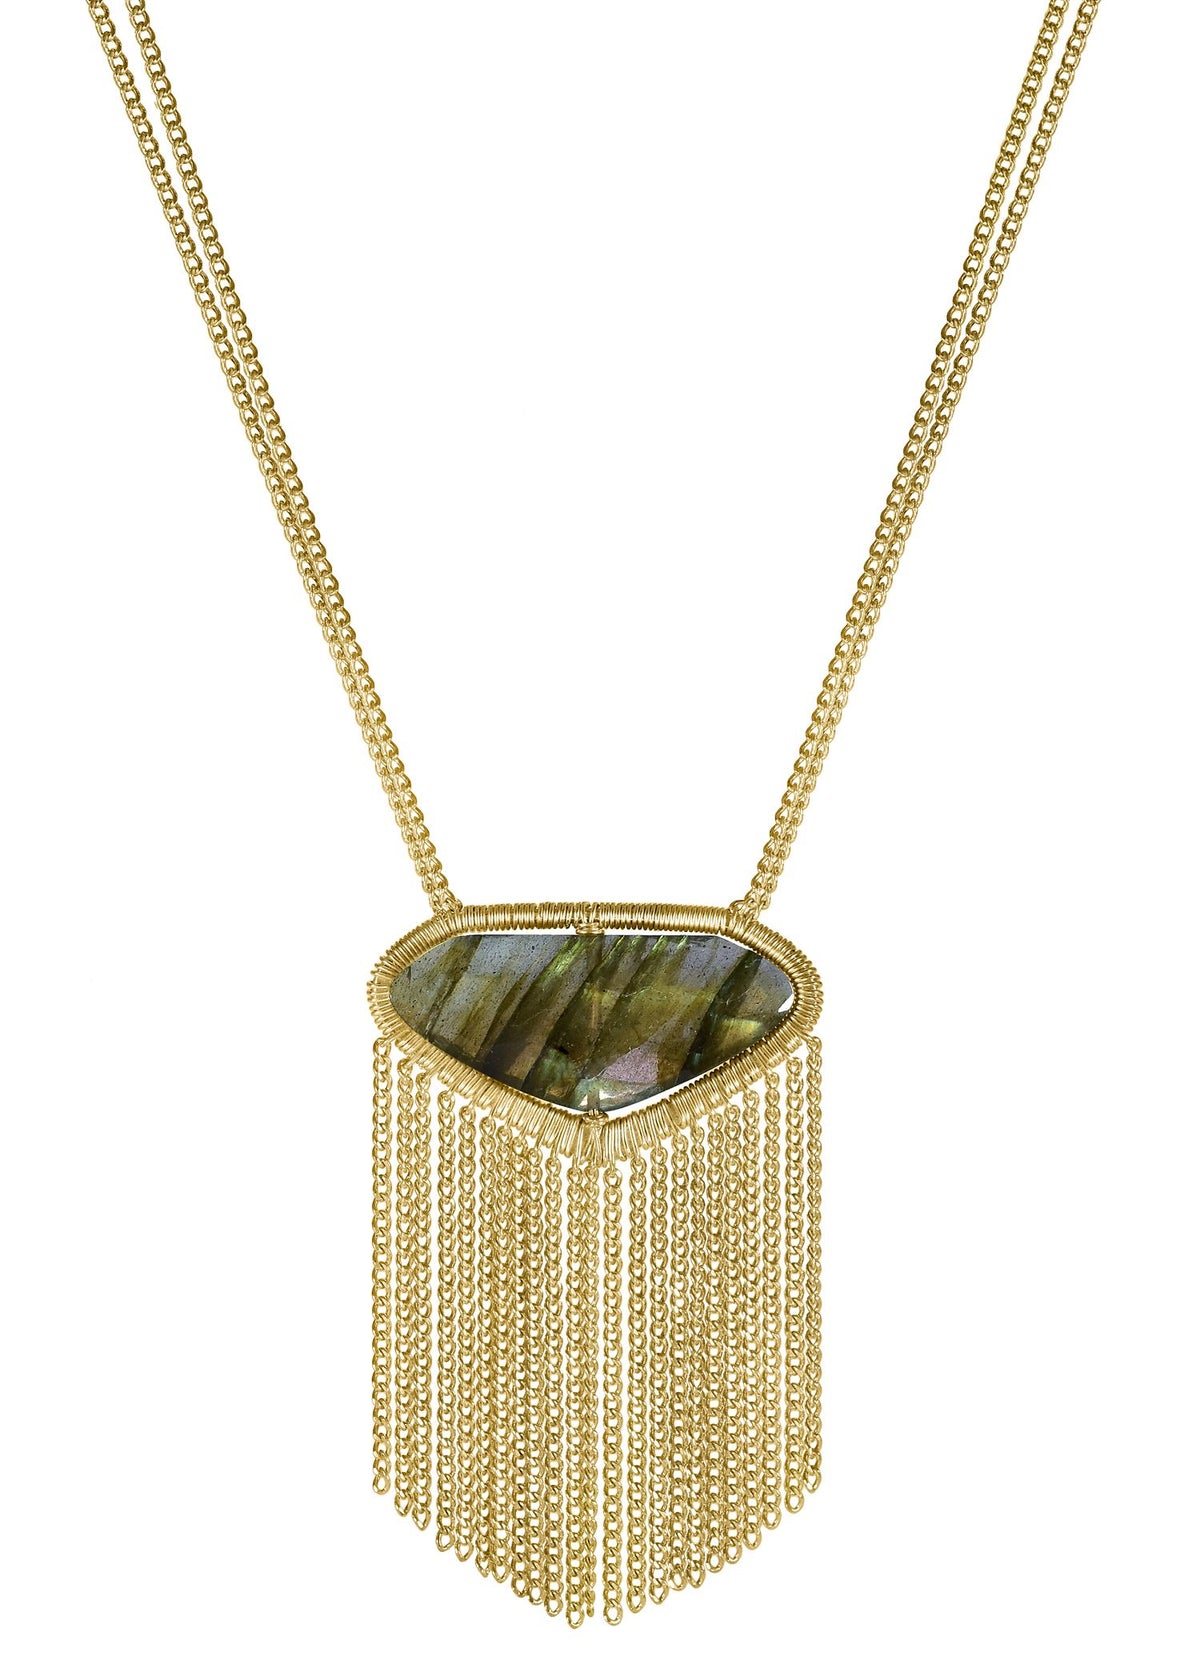 Labradorite 14k gold fill Necklace measures 18” in length Pendant measures 1-9/16” in length (including fringe) and 1” in width Handmade in our Los Angeles studio